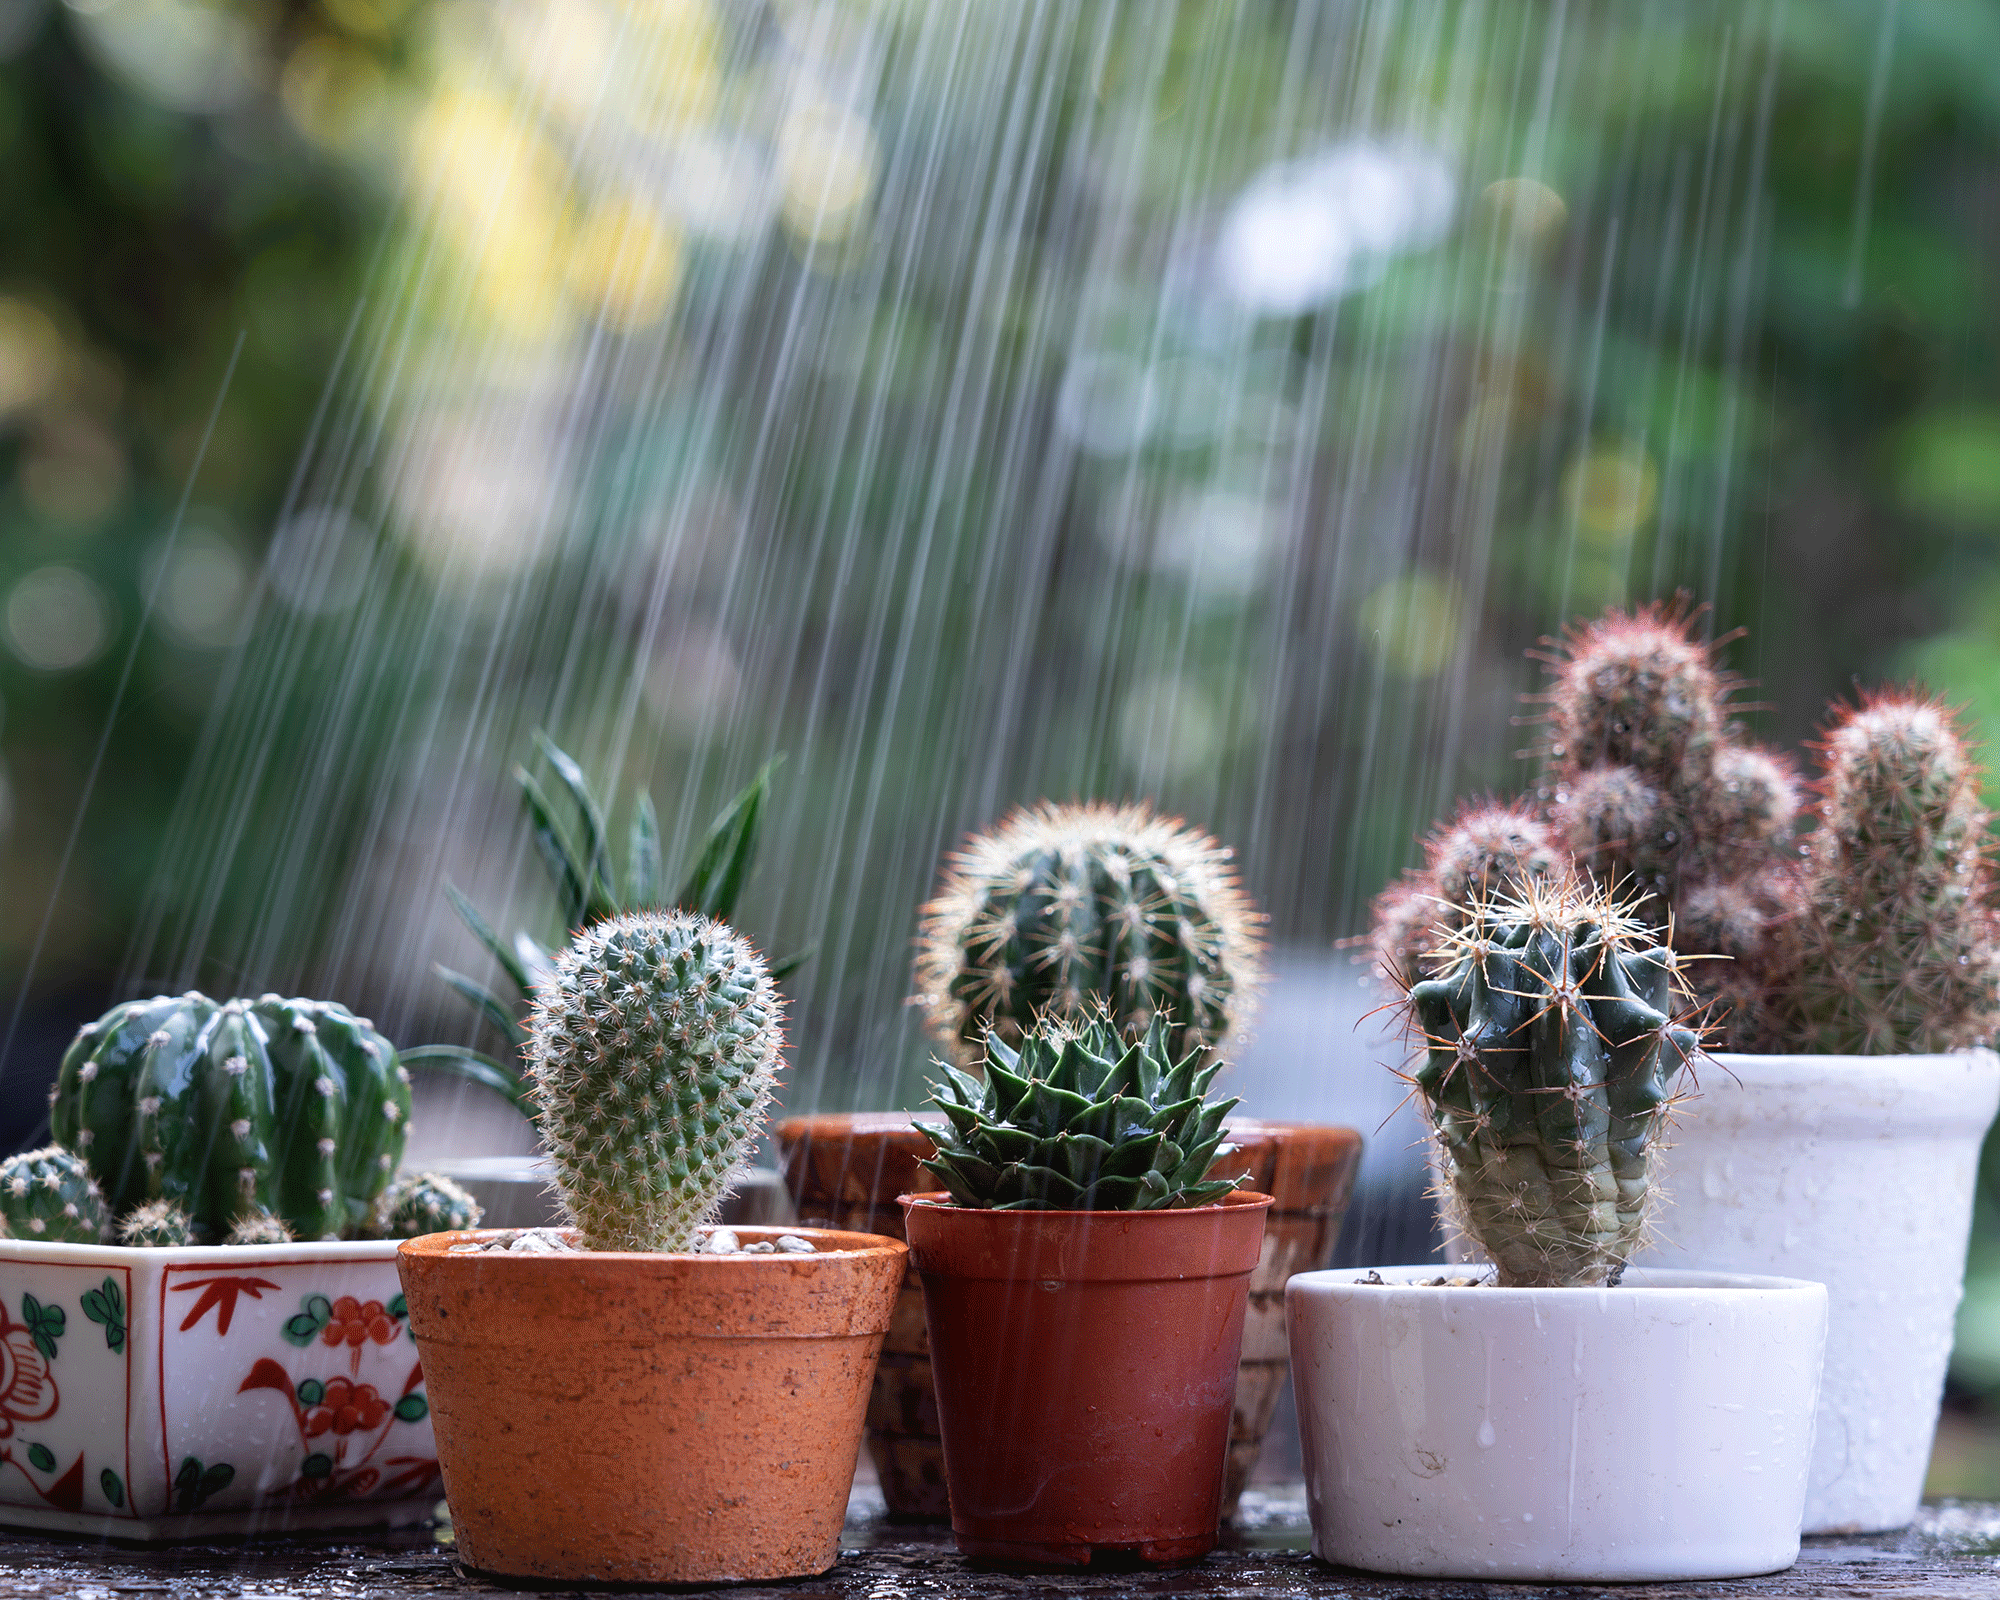 pots of cactus in a water shower